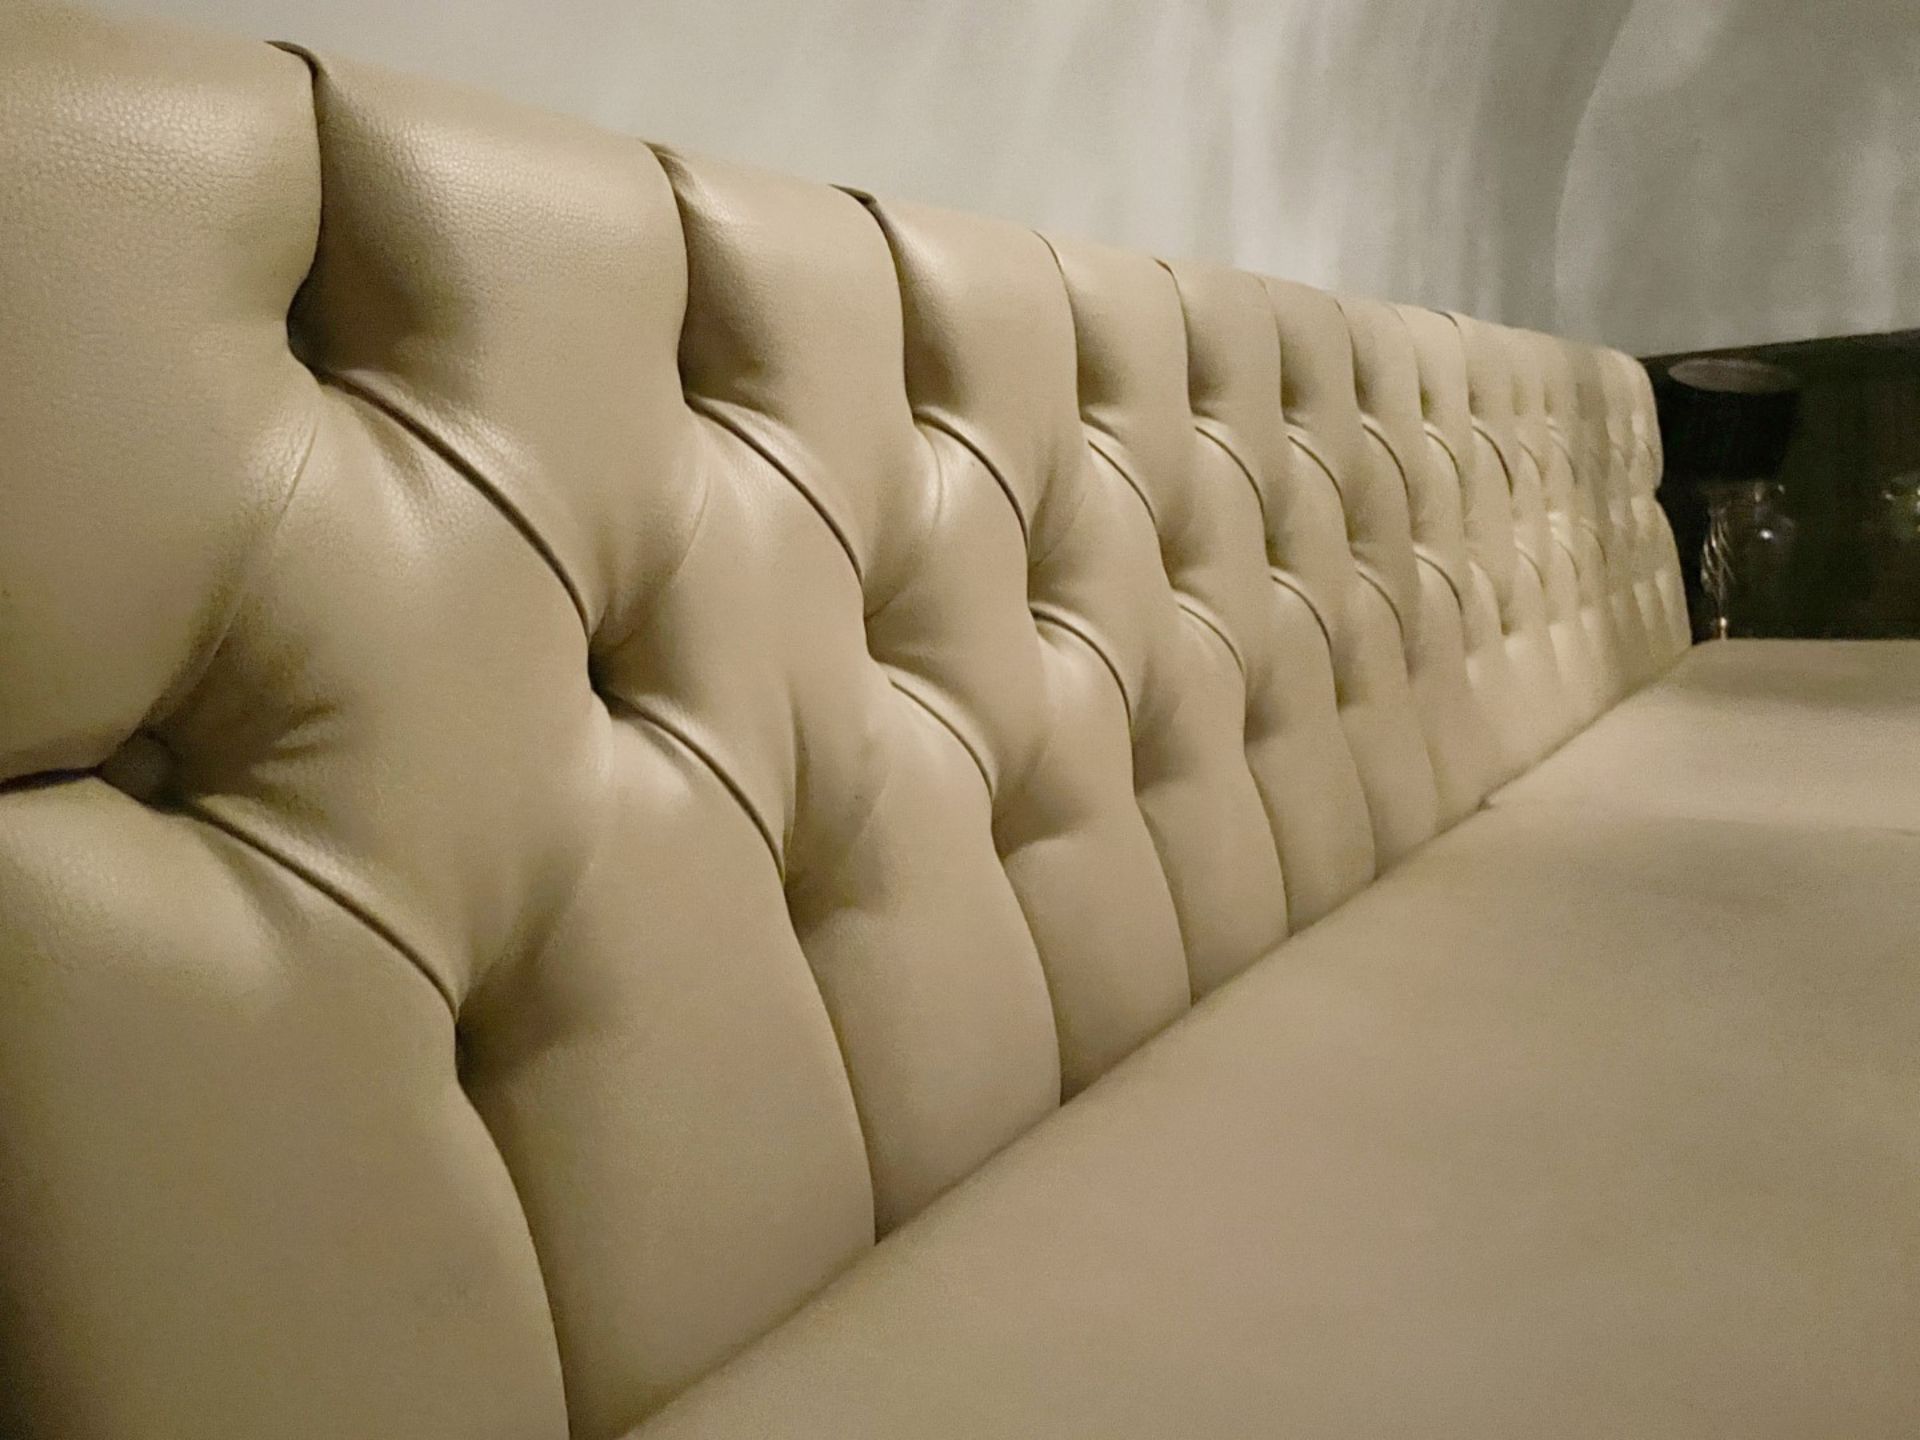 5 x Sections of Commercial Button Back Banquette Booth Seating Upholstered in a Cream Faux Leather - Image 3 of 14